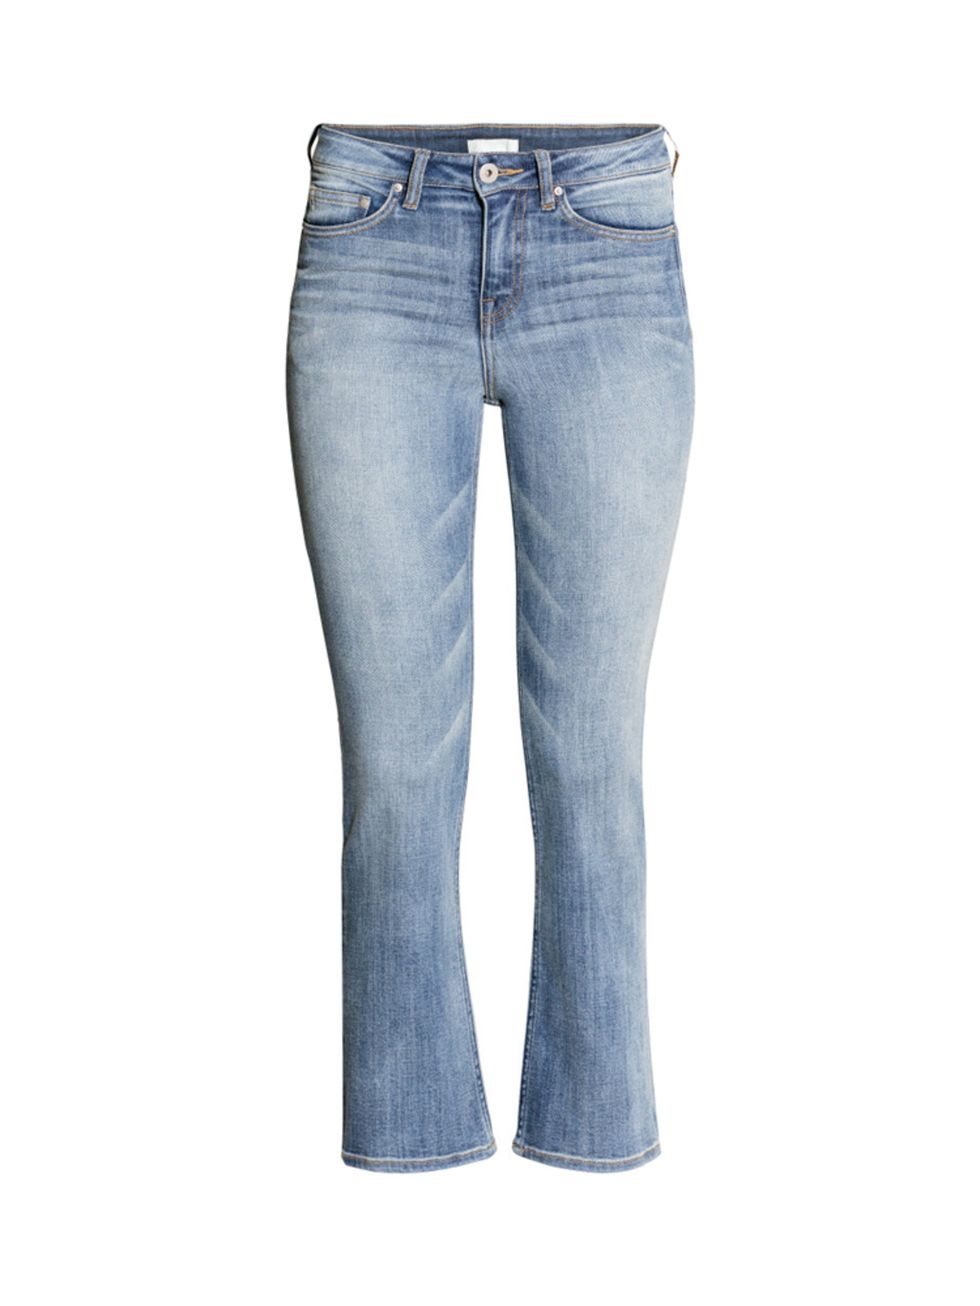 <p>Cropped flares are the surprisingly flattering denim trend to invest in now.</p>

<p><a href="http://www.hm.com/gb/product/19220?article=19220-B#article=19220-B" target="_blank">H&M</a> jeans, £29.99</p>